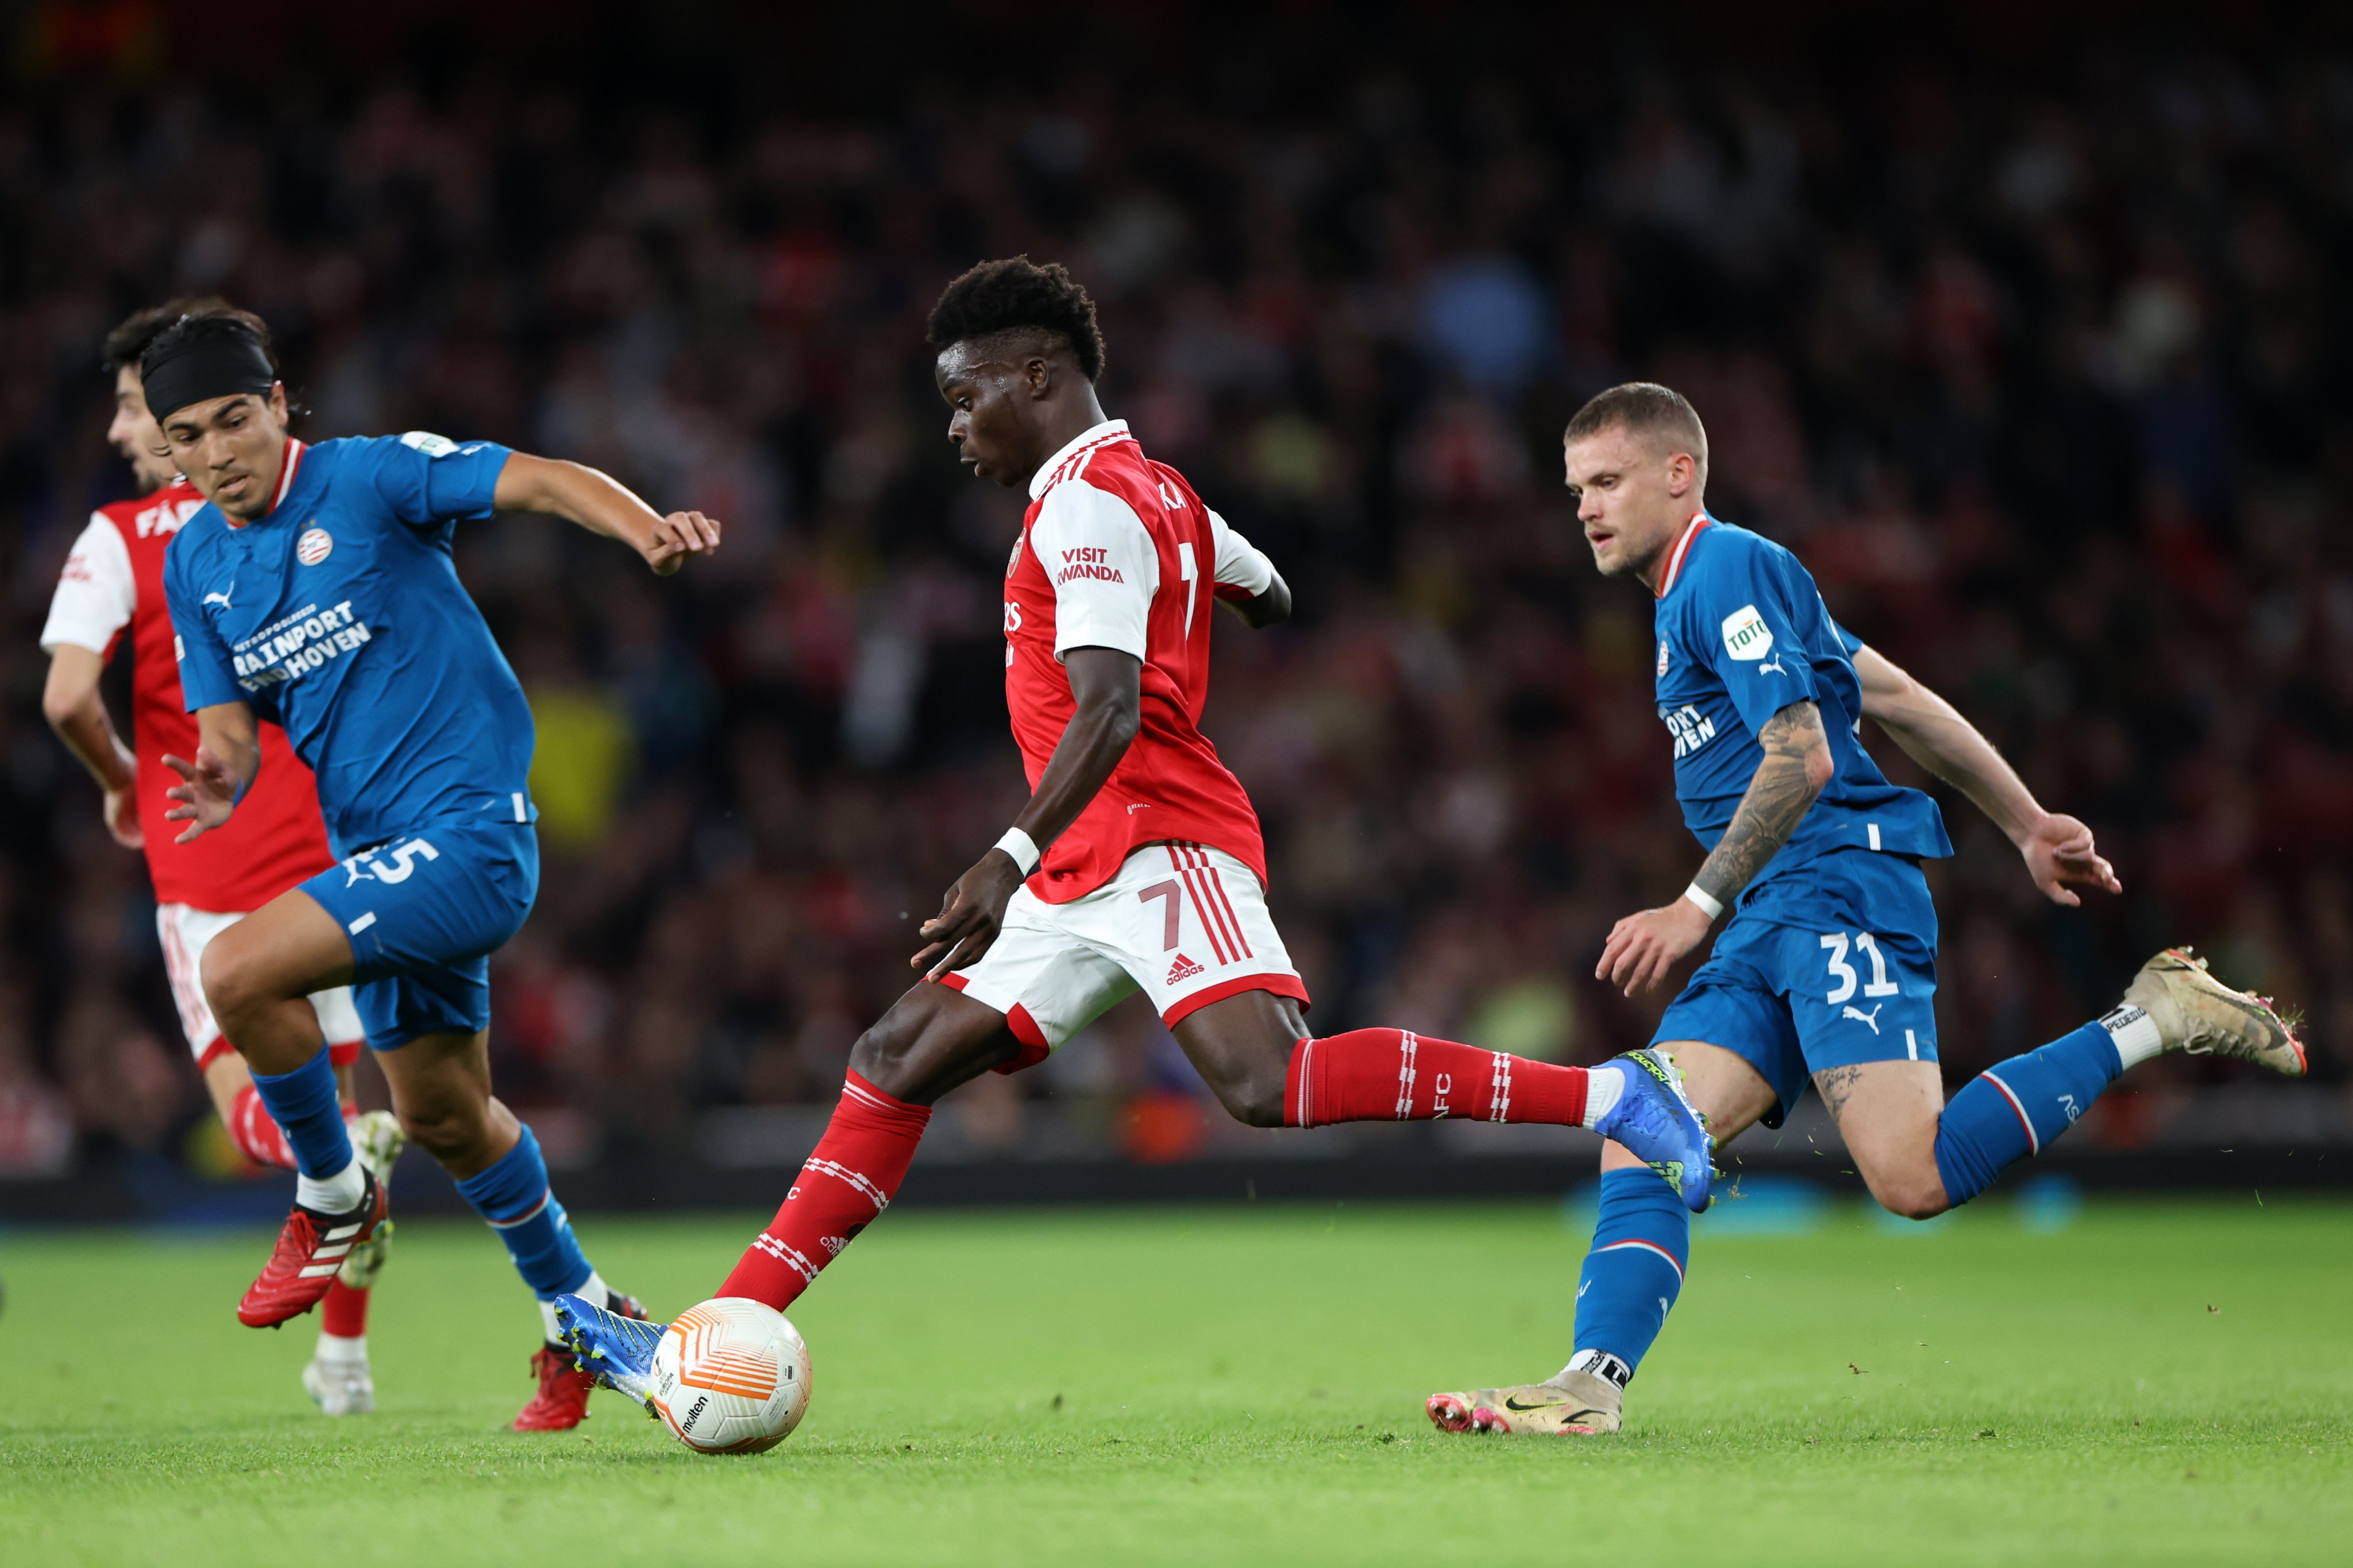 PSV vs Arsenal LIVE - Arsenal AIM for FIFTH consecutive WIN in Group A against PSV - Check team news, Injuries & Suspensions, Live Telecast, Starting XI, Predictions - Follow LIVE